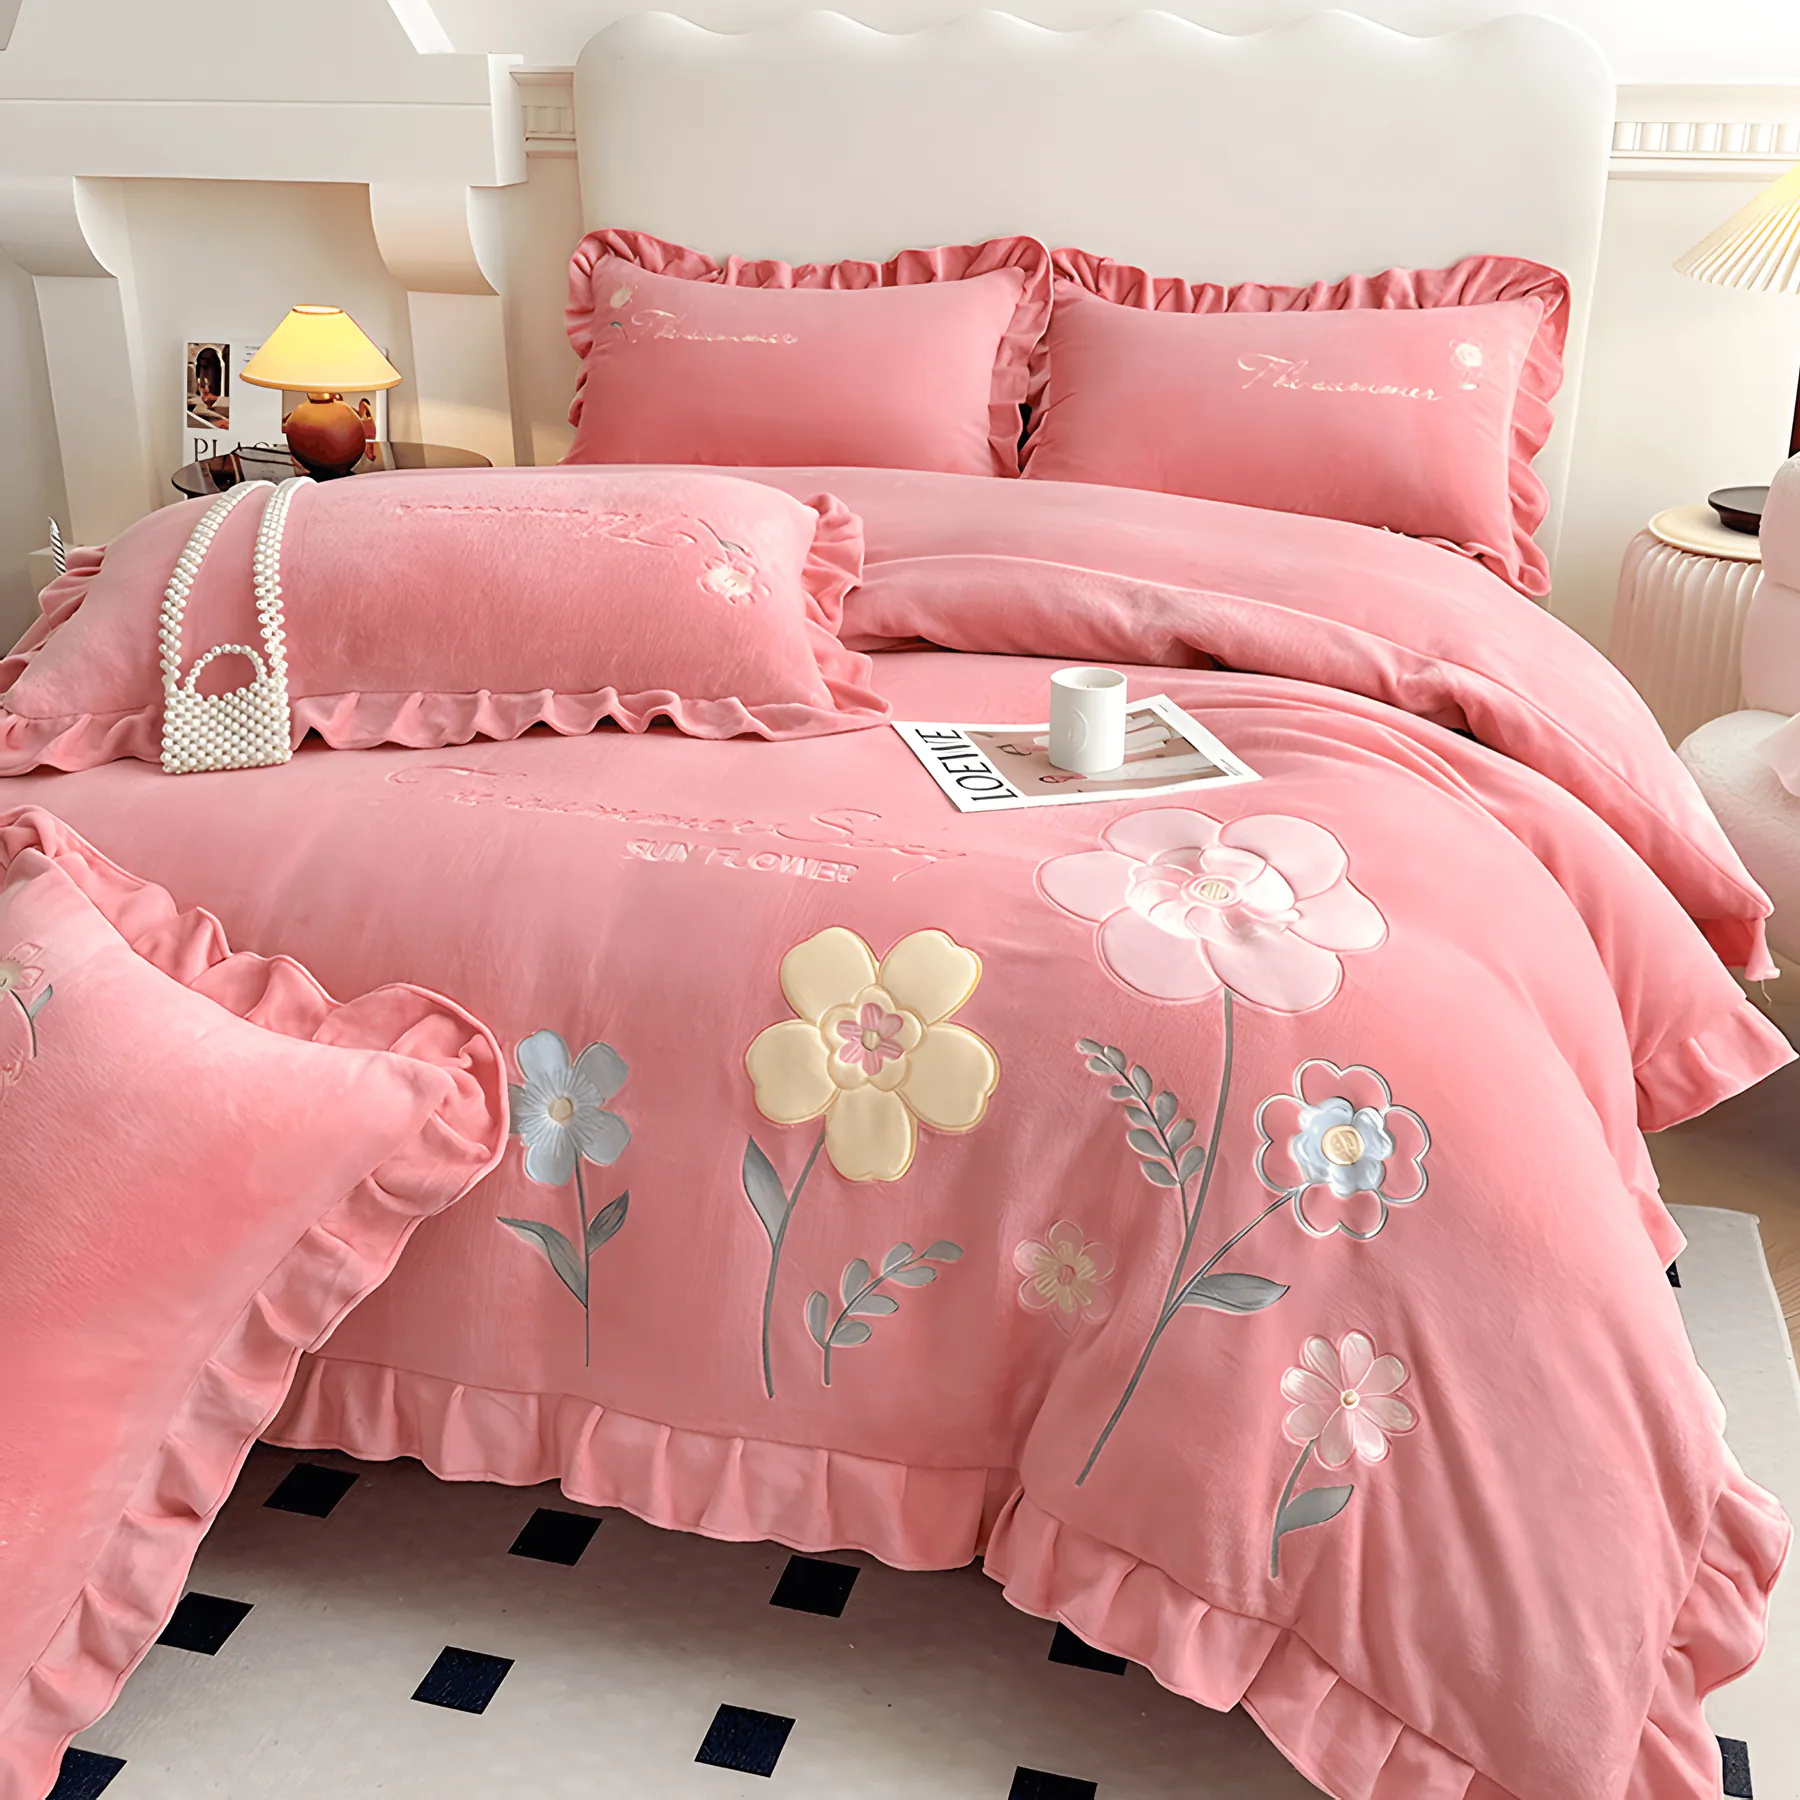 Comfy Milk Fiber Embroidery Quilt Cover Bed Sheet Pillowcases Set01